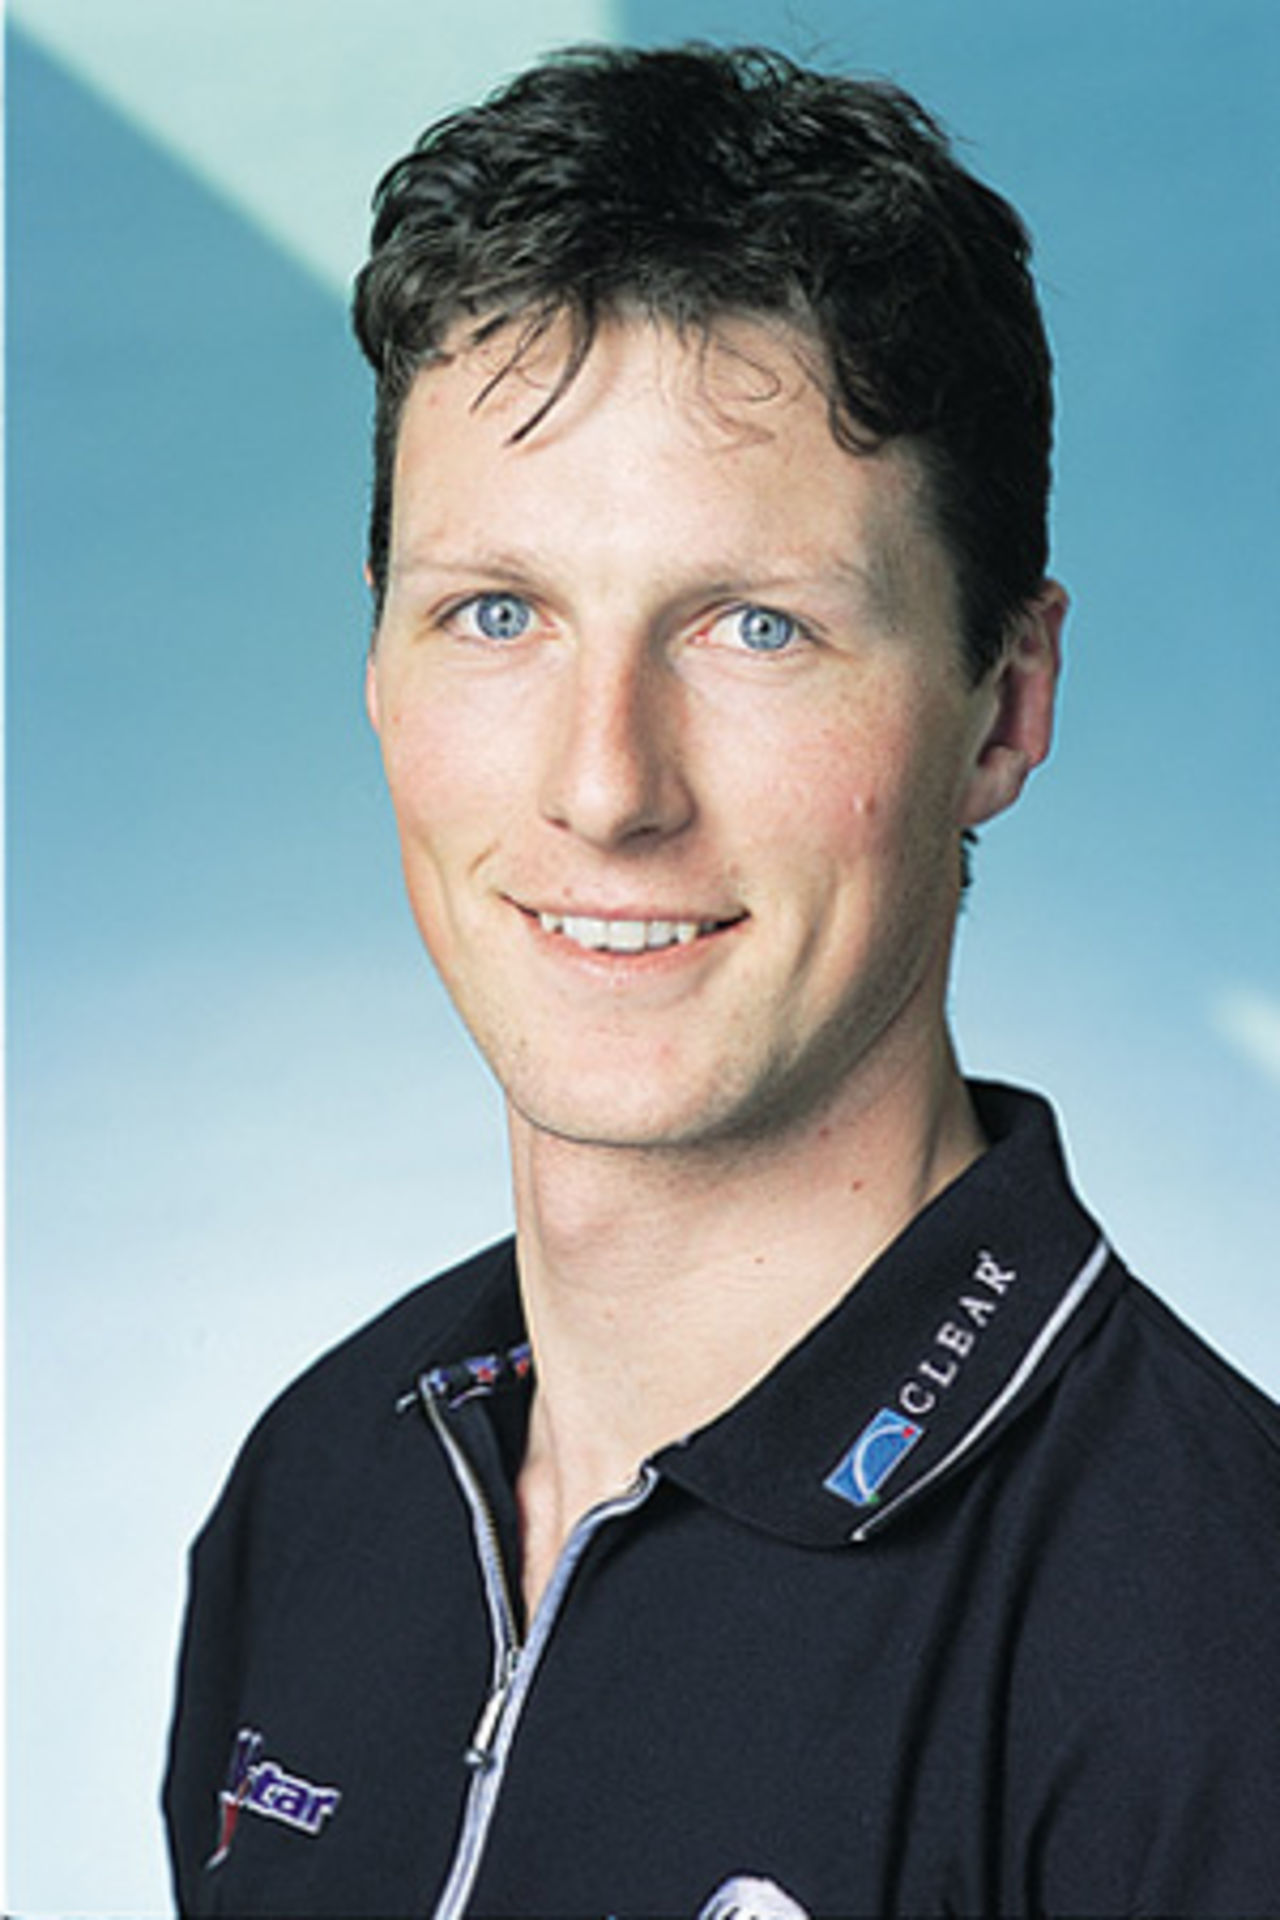 Portrait of Shayne O'Connor - New Zealand player in the 2001/02 season.